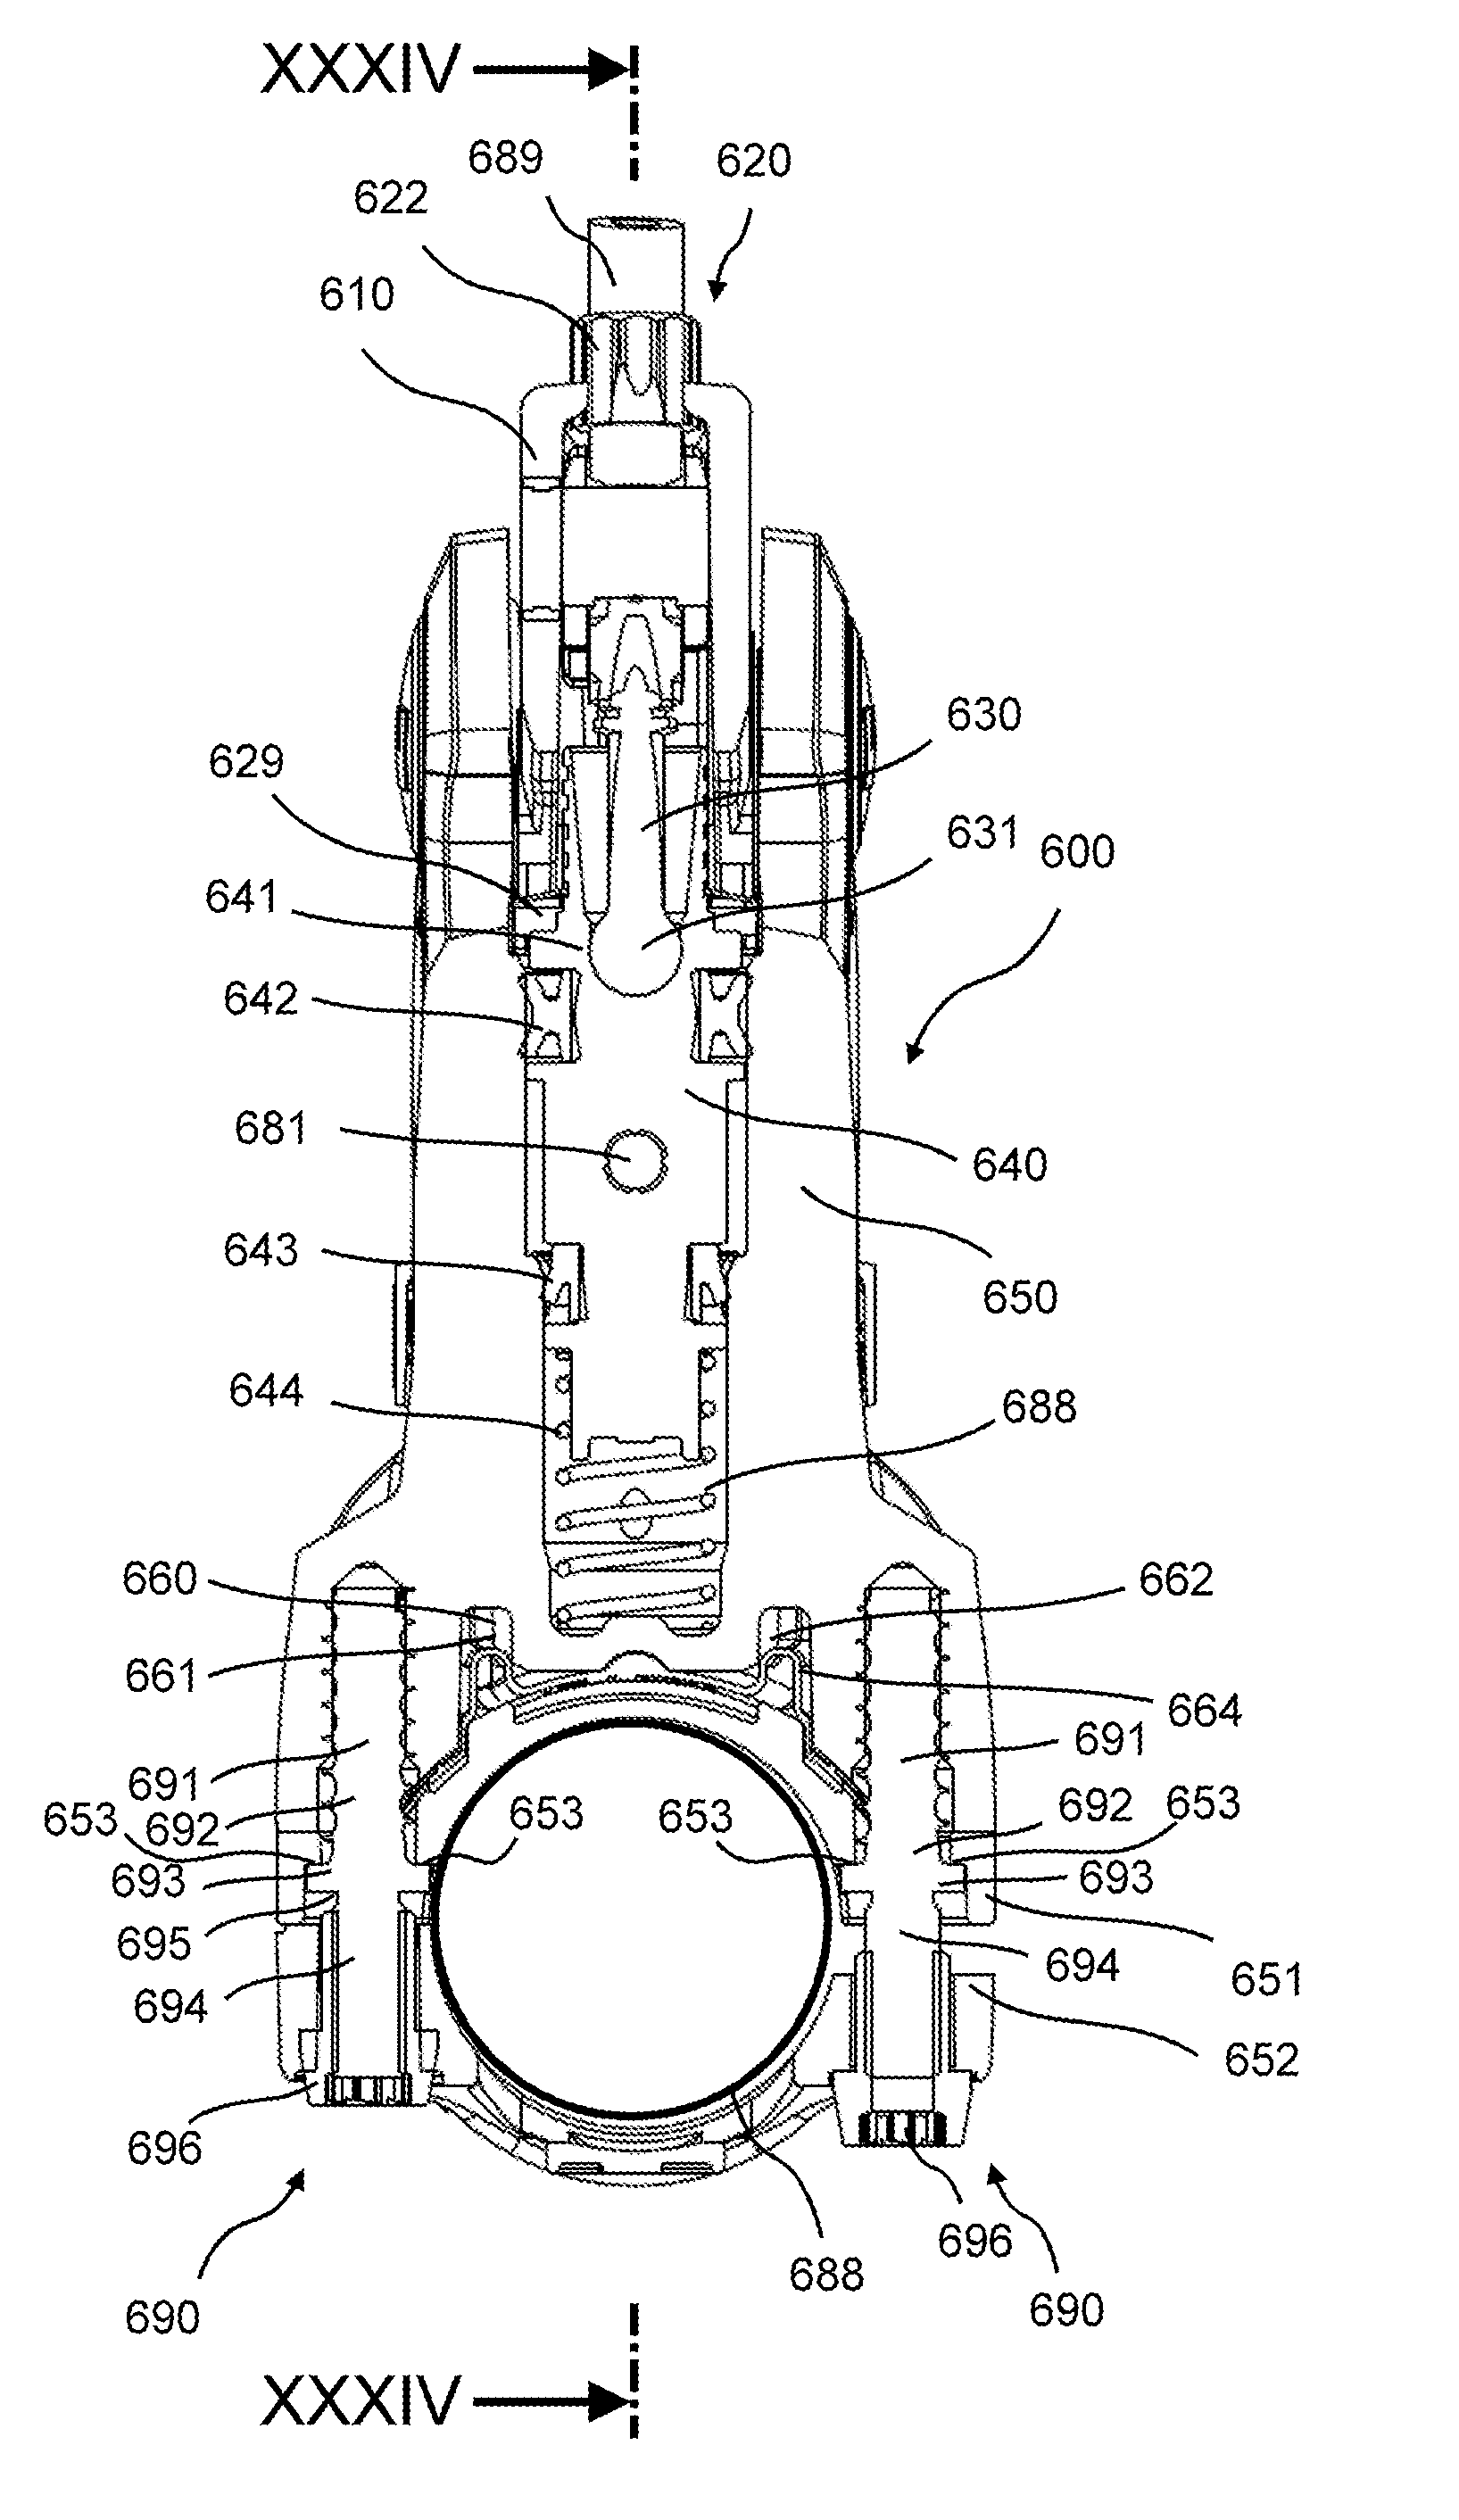 Master Mounting and Hydraulic Disk Brake